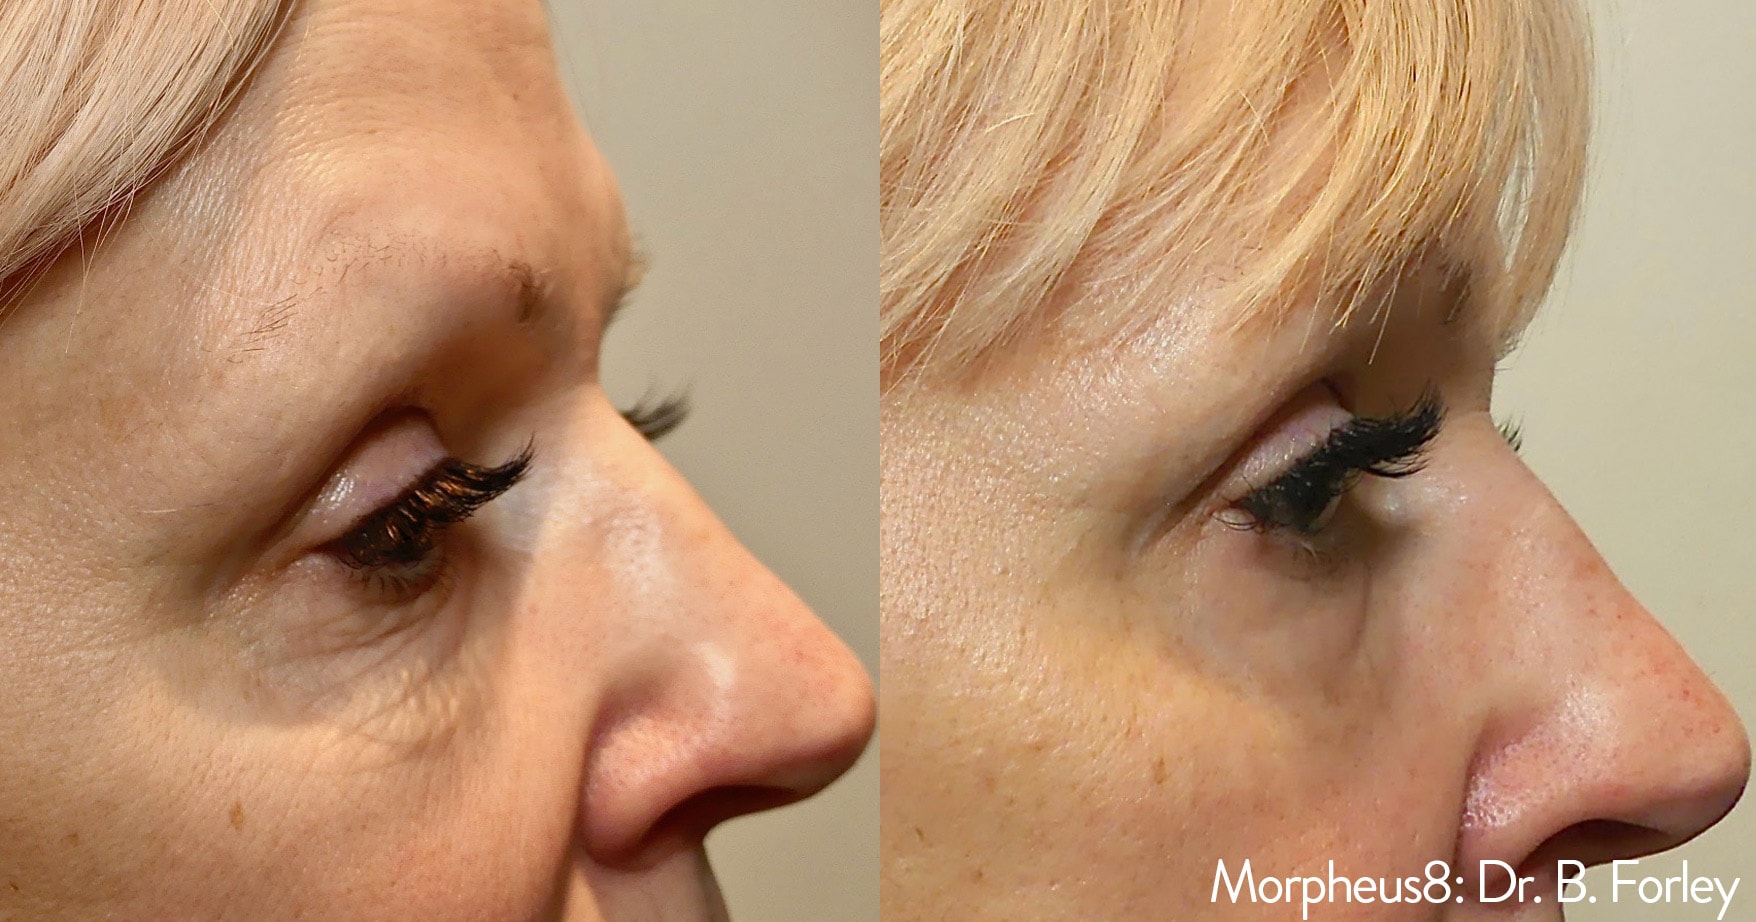 Before and After photos of Morpheus8 treatments tightening loose skin and reducing bags around a woman’s eyes